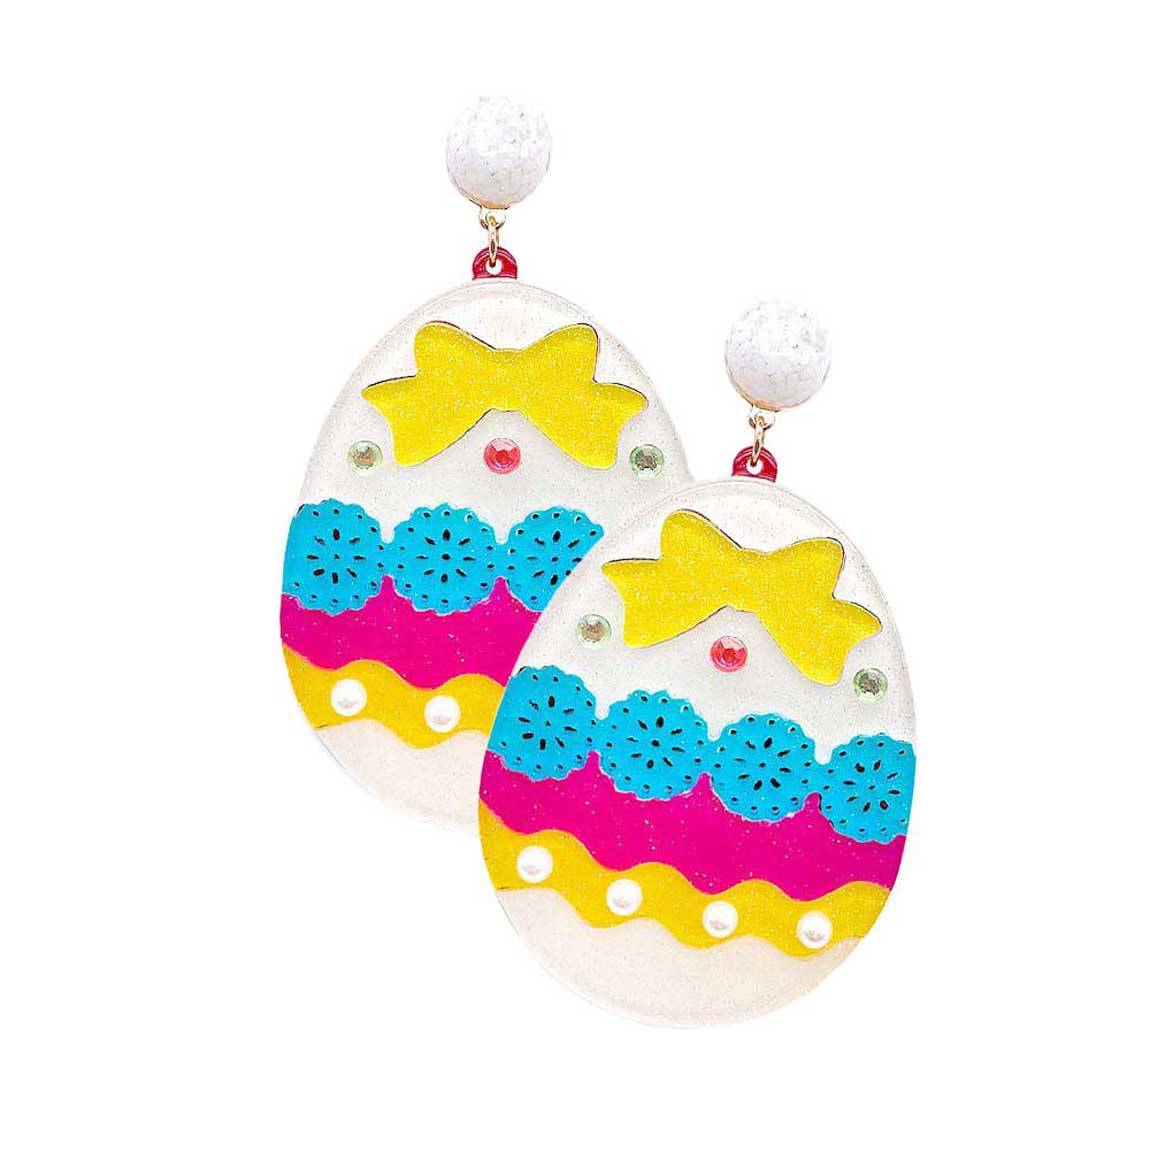 Ivory Glittered Resin Easter Egg Dangle Earrings, perfect for the festive season, embrace the Easter spirit with these cute earrings, these adorable dainty gift earrings are bound to cause a smile or two. Surprise your loved ones on this Easter Sunday occasion, great gift idea for Wife, Mom, or your Loving One.